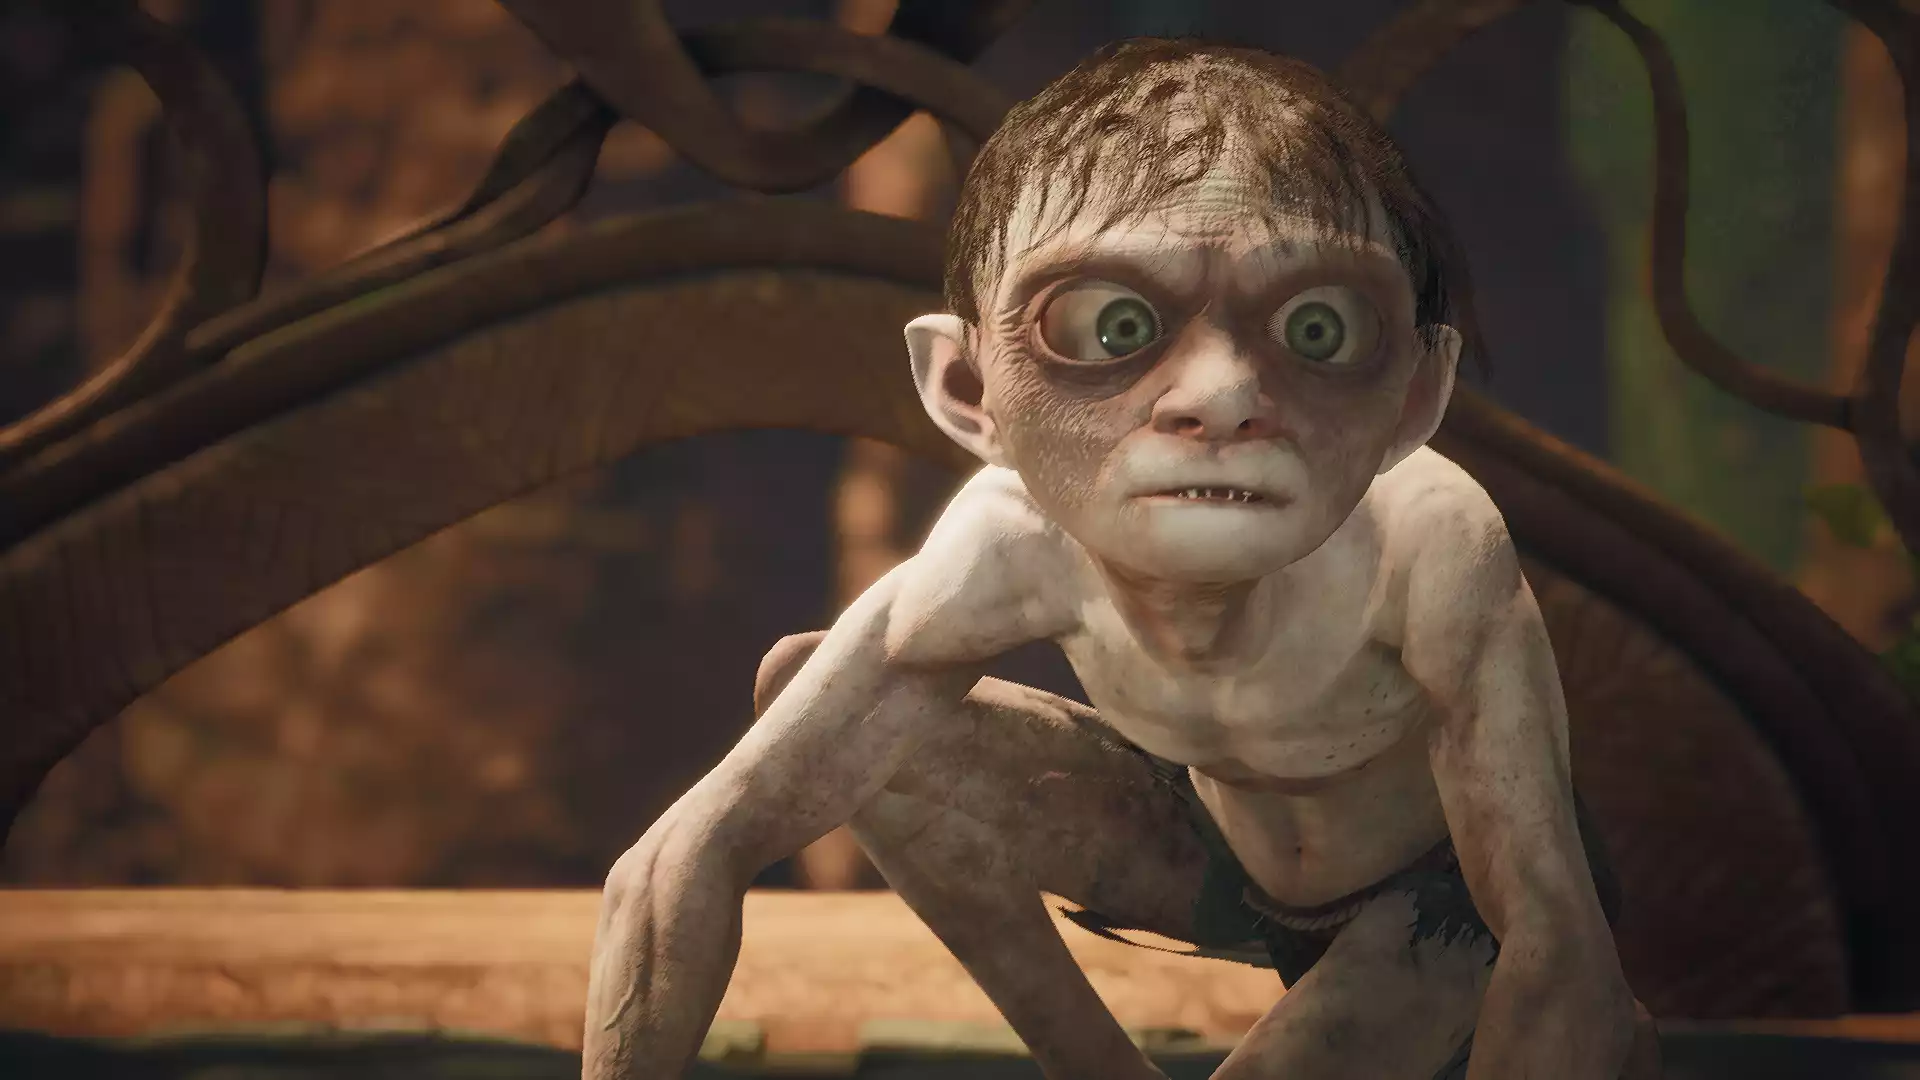 The Gollum apology was allegedly written by ChatGPT